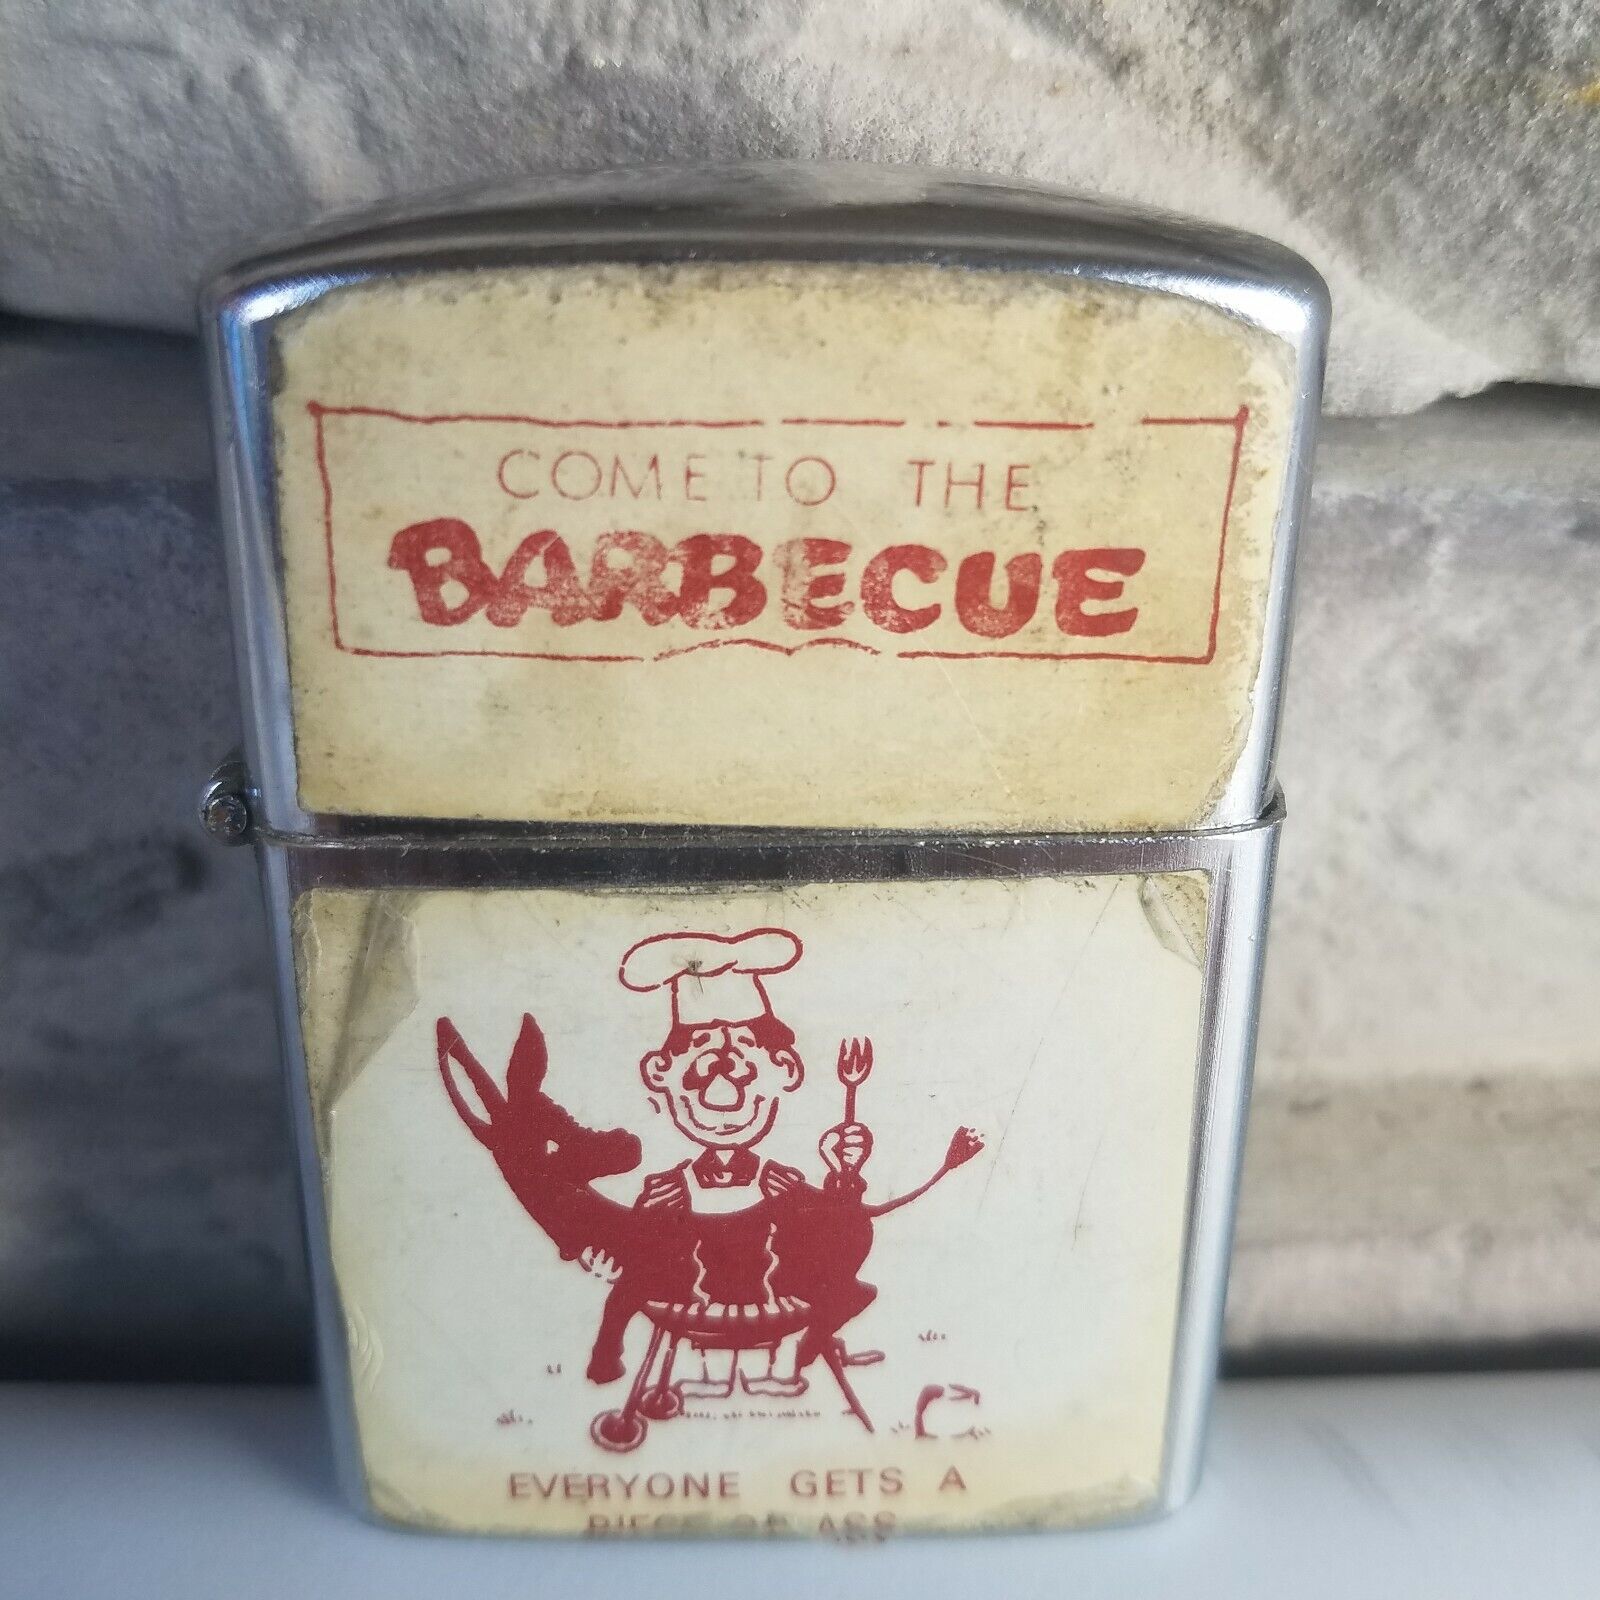 Donkey Come To The Barbecue Everyone Gets A Piece Of Ass 5 Barrel Hinge Vtg G